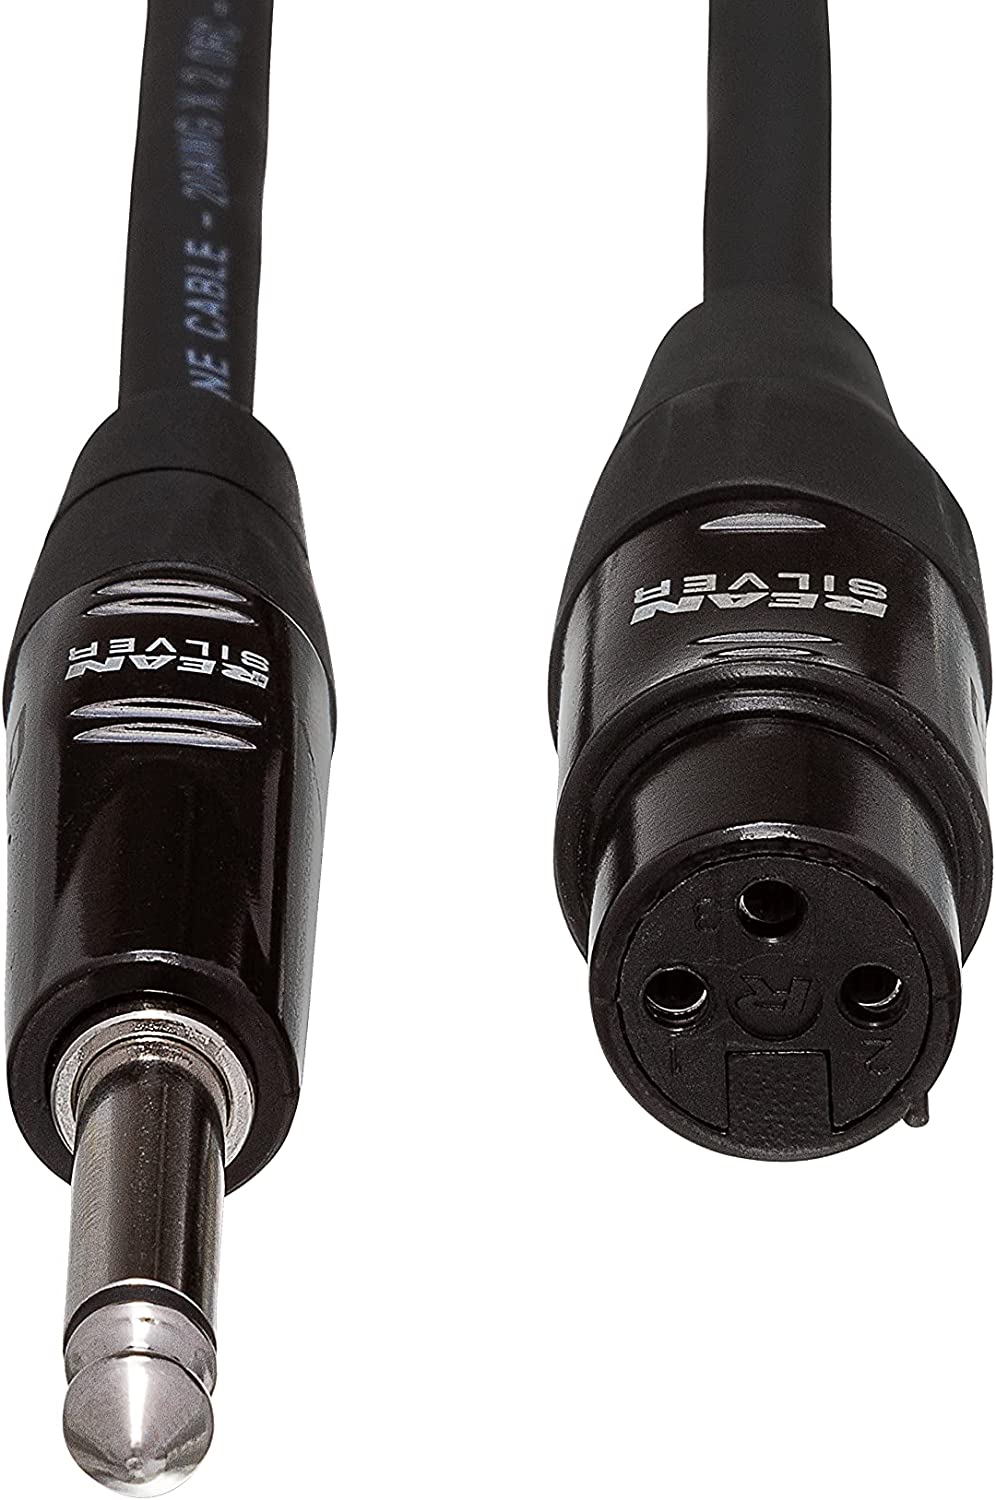 Hosa HMIC-025HZ Pro Microphone Cable, REAN XLR3F to 1/4 in TS, 25 ft